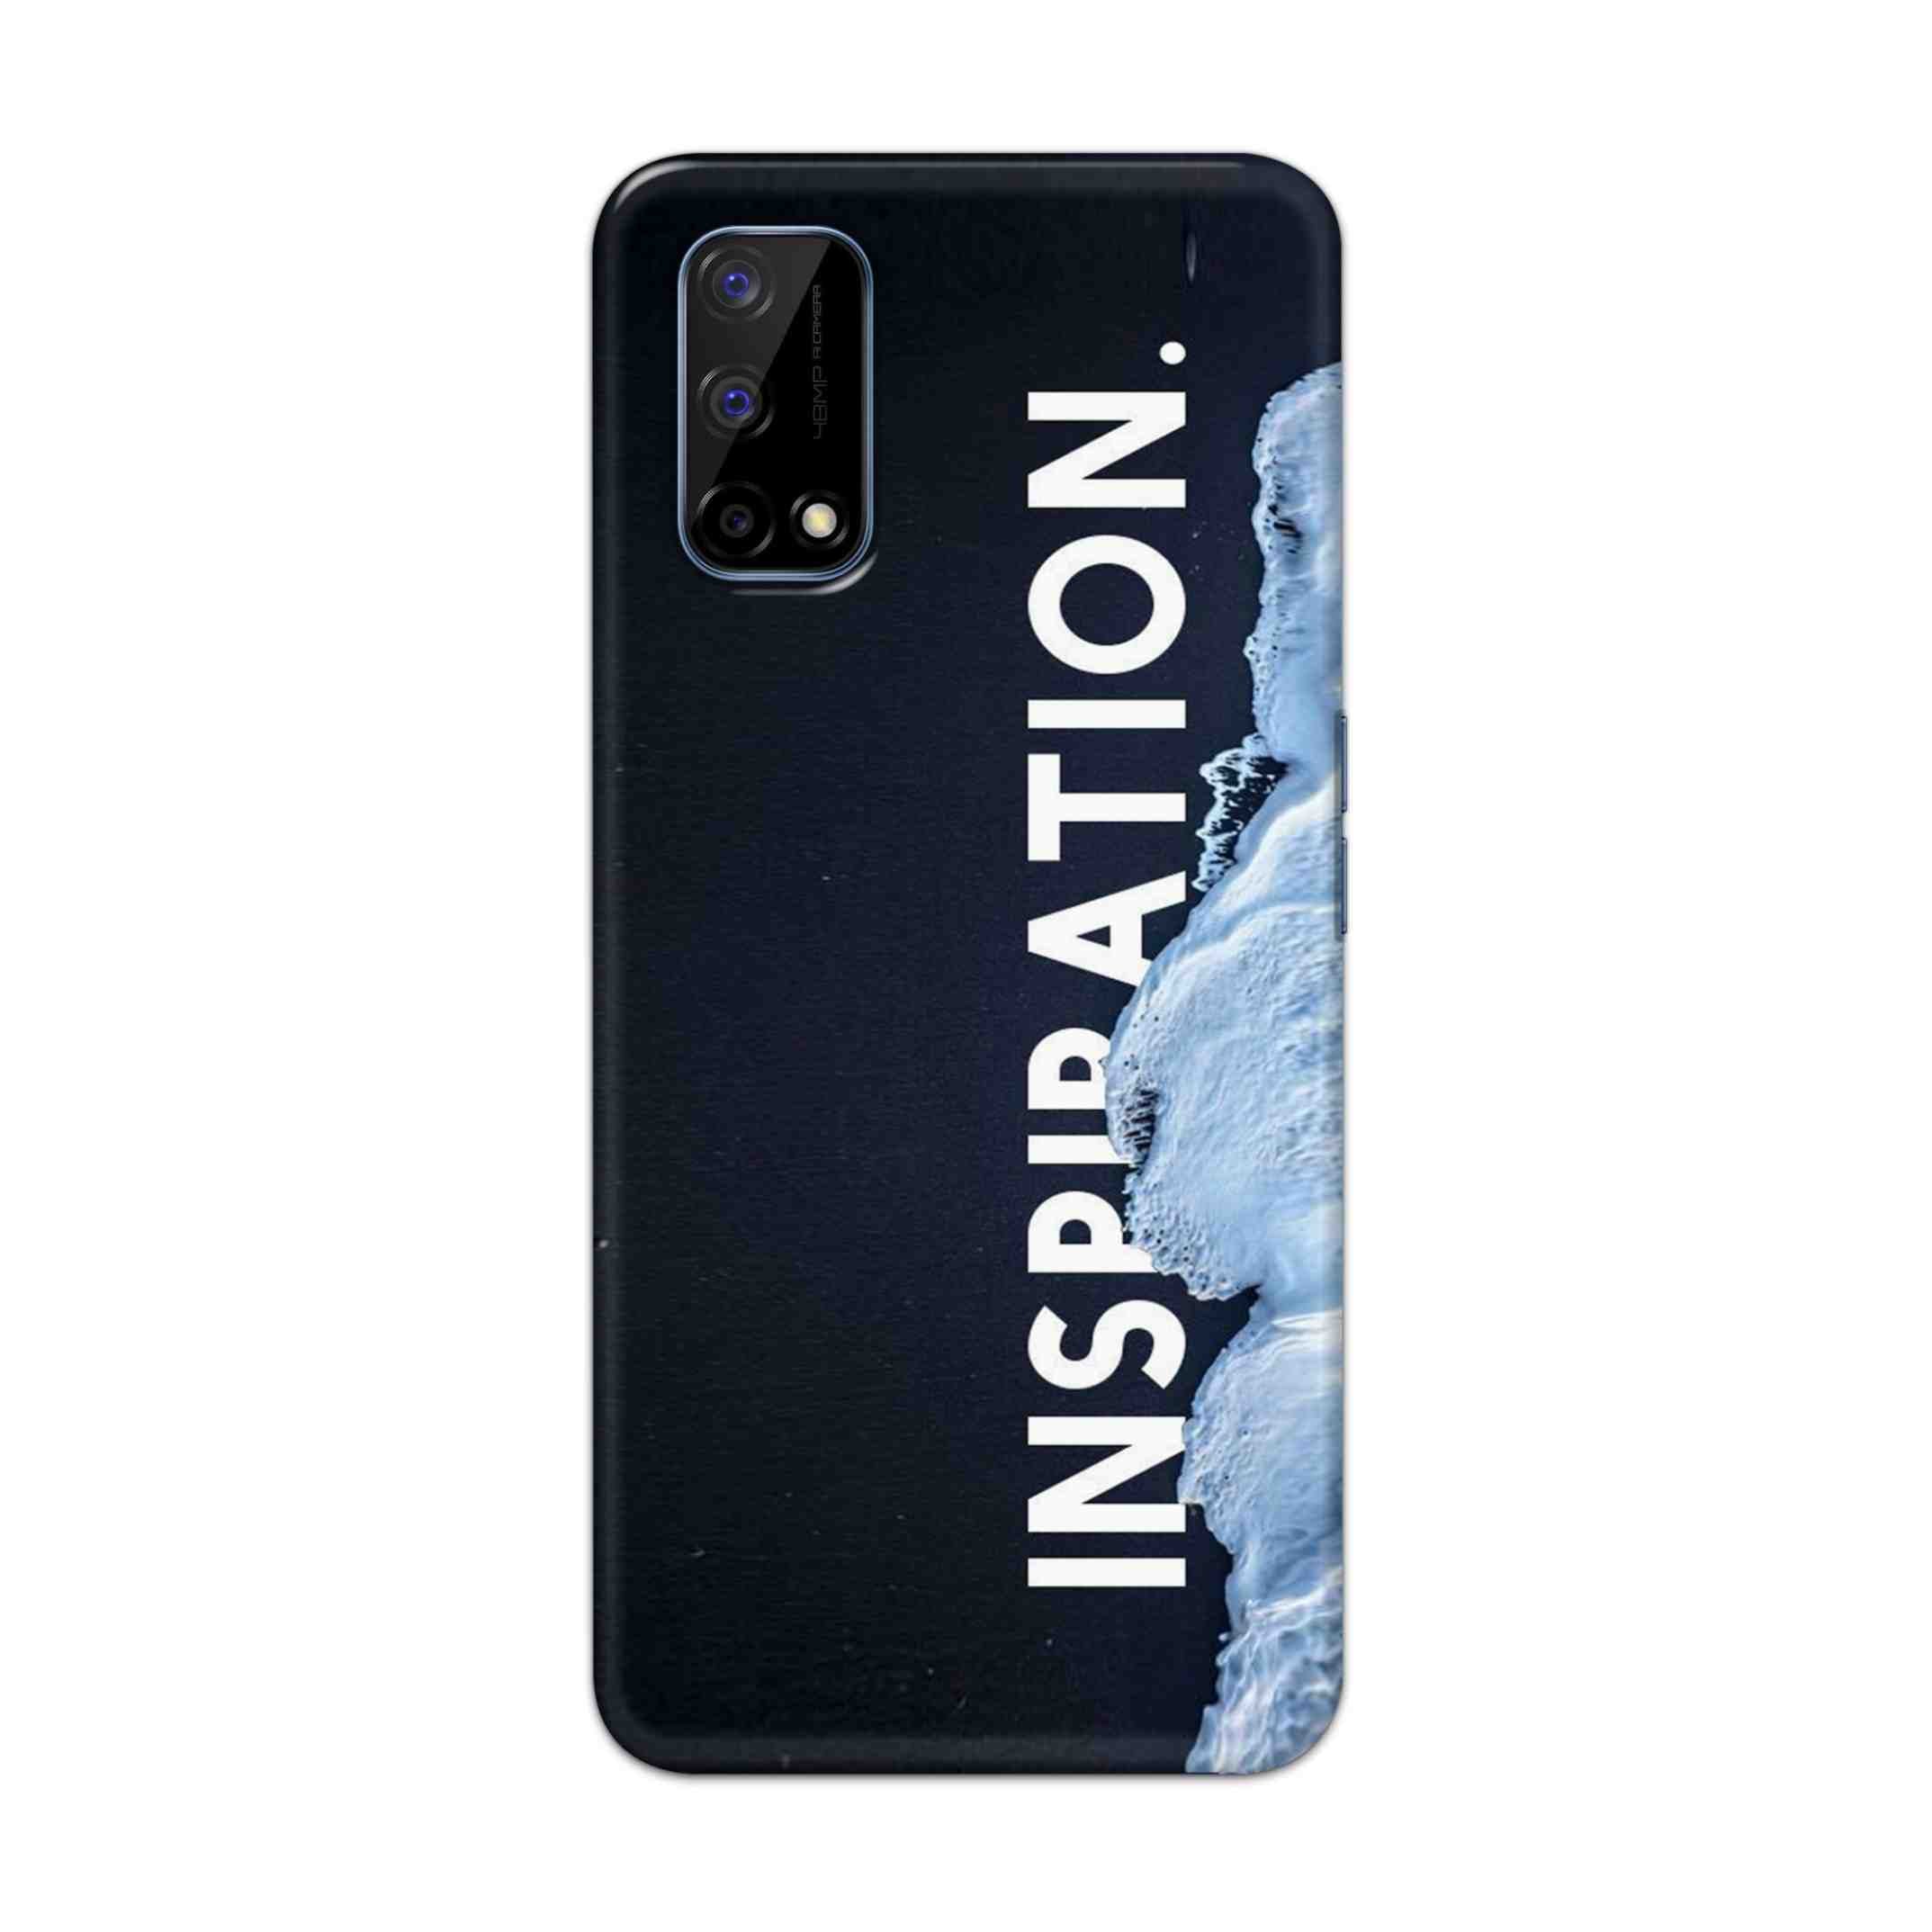 Buy Inspiration Hard Back Mobile Phone Case Cover For Realme Narzo 30 Pro Online